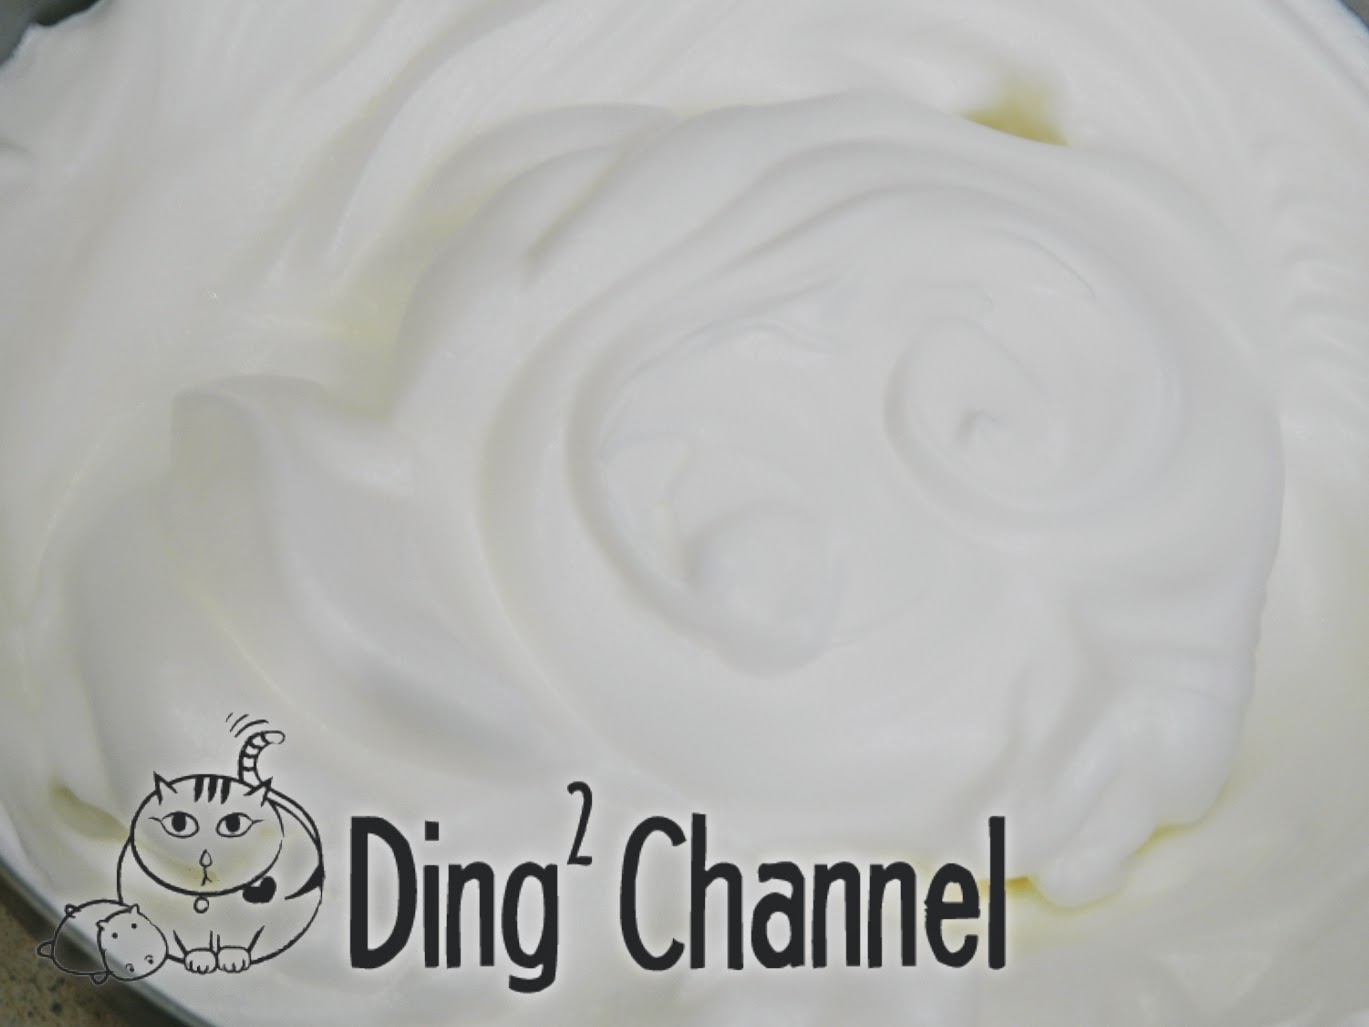 Dingding Channel 假日無油蒸蛋白蛋糕